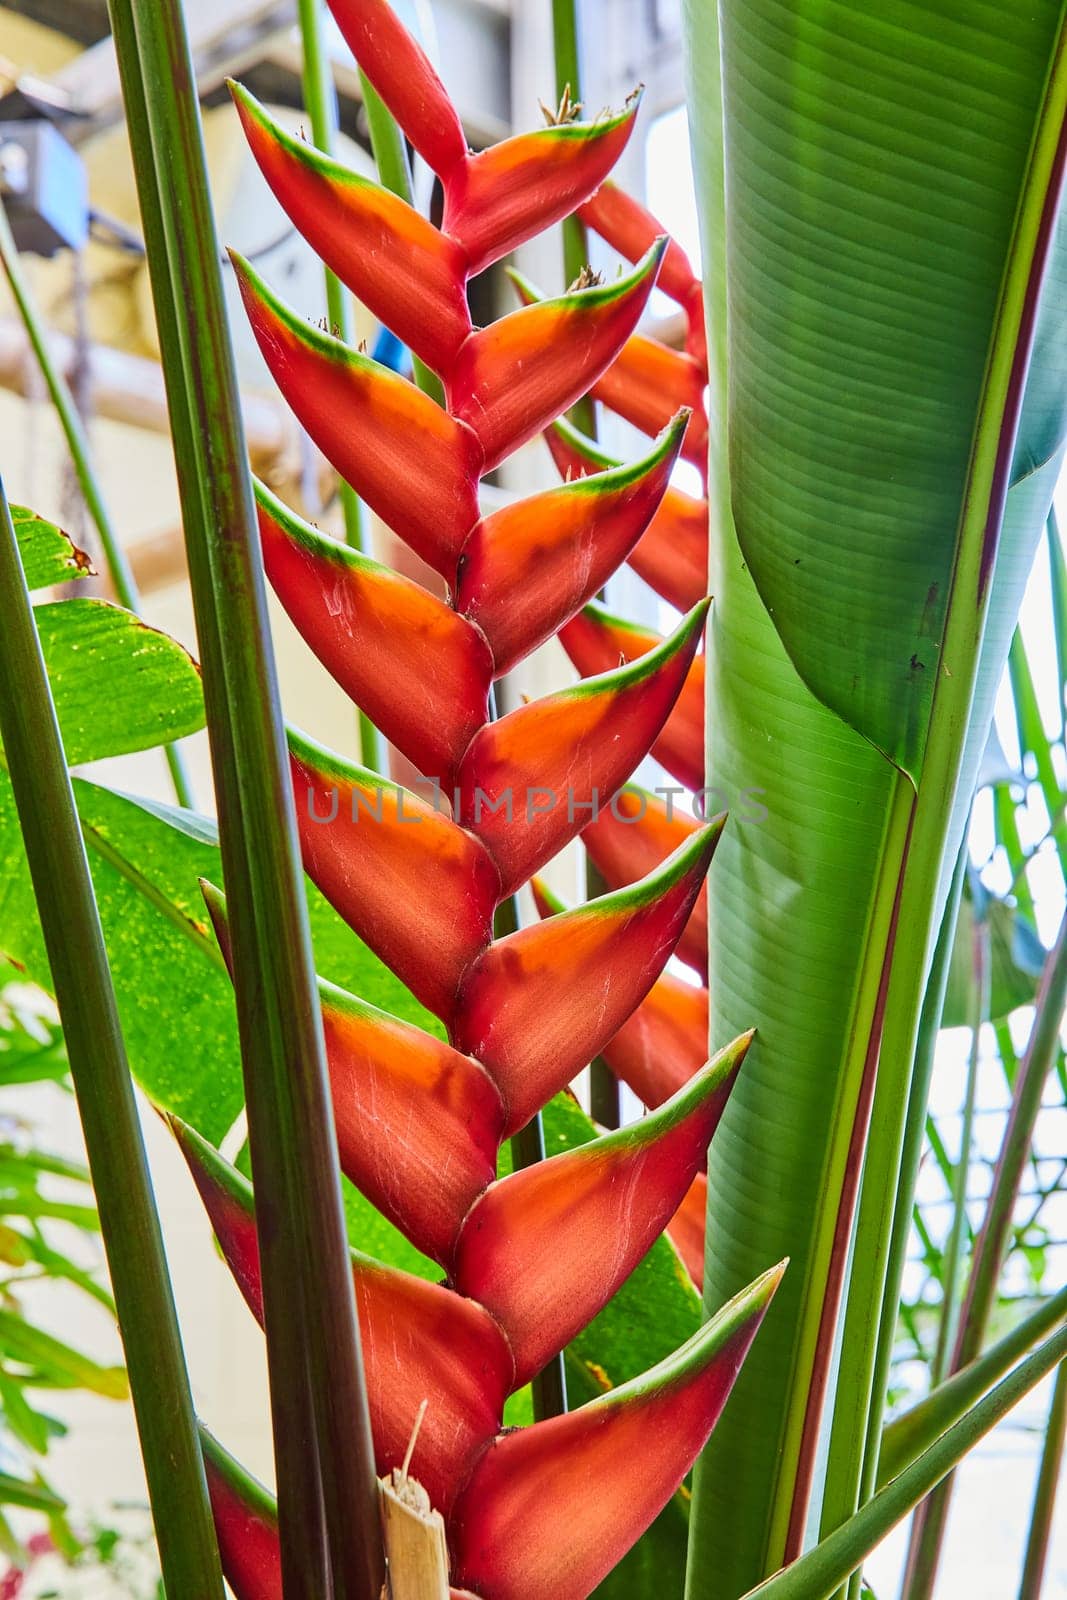 Vibrant Heliconia Bracts in Muncie Conservatory by njproductions